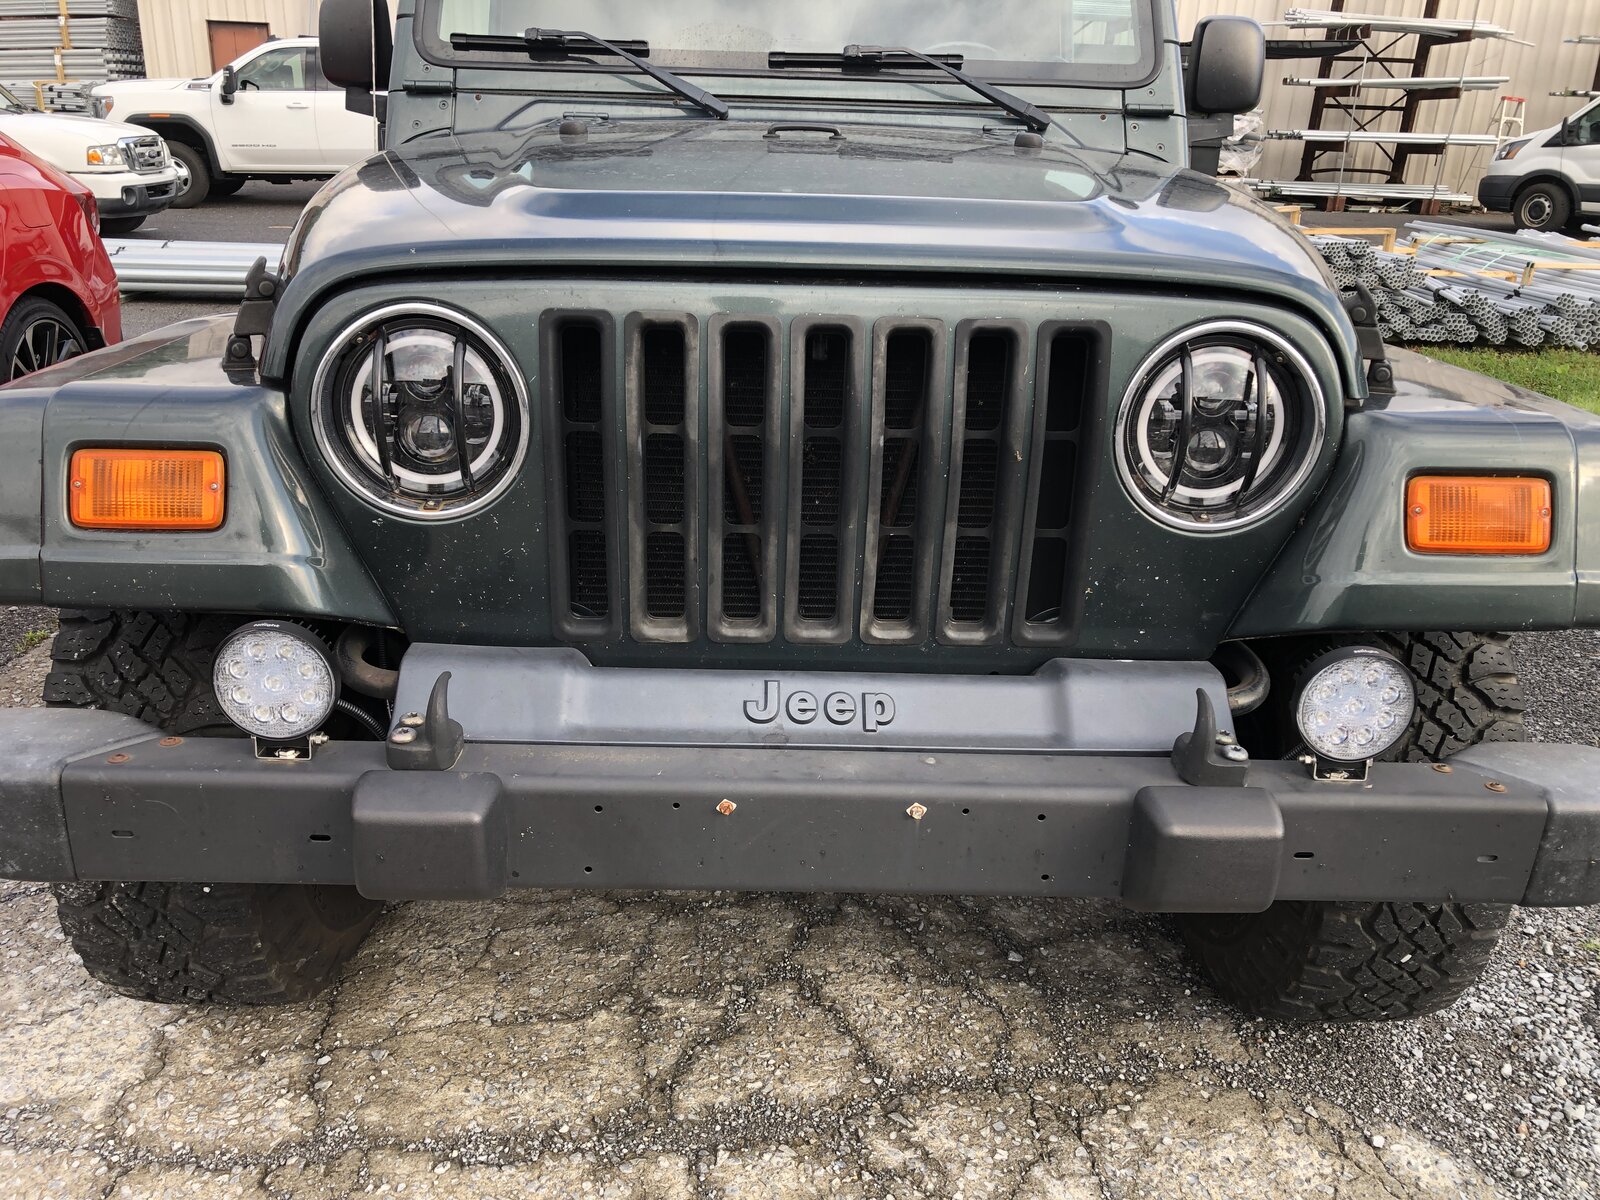 03 Jeep Front.JPG